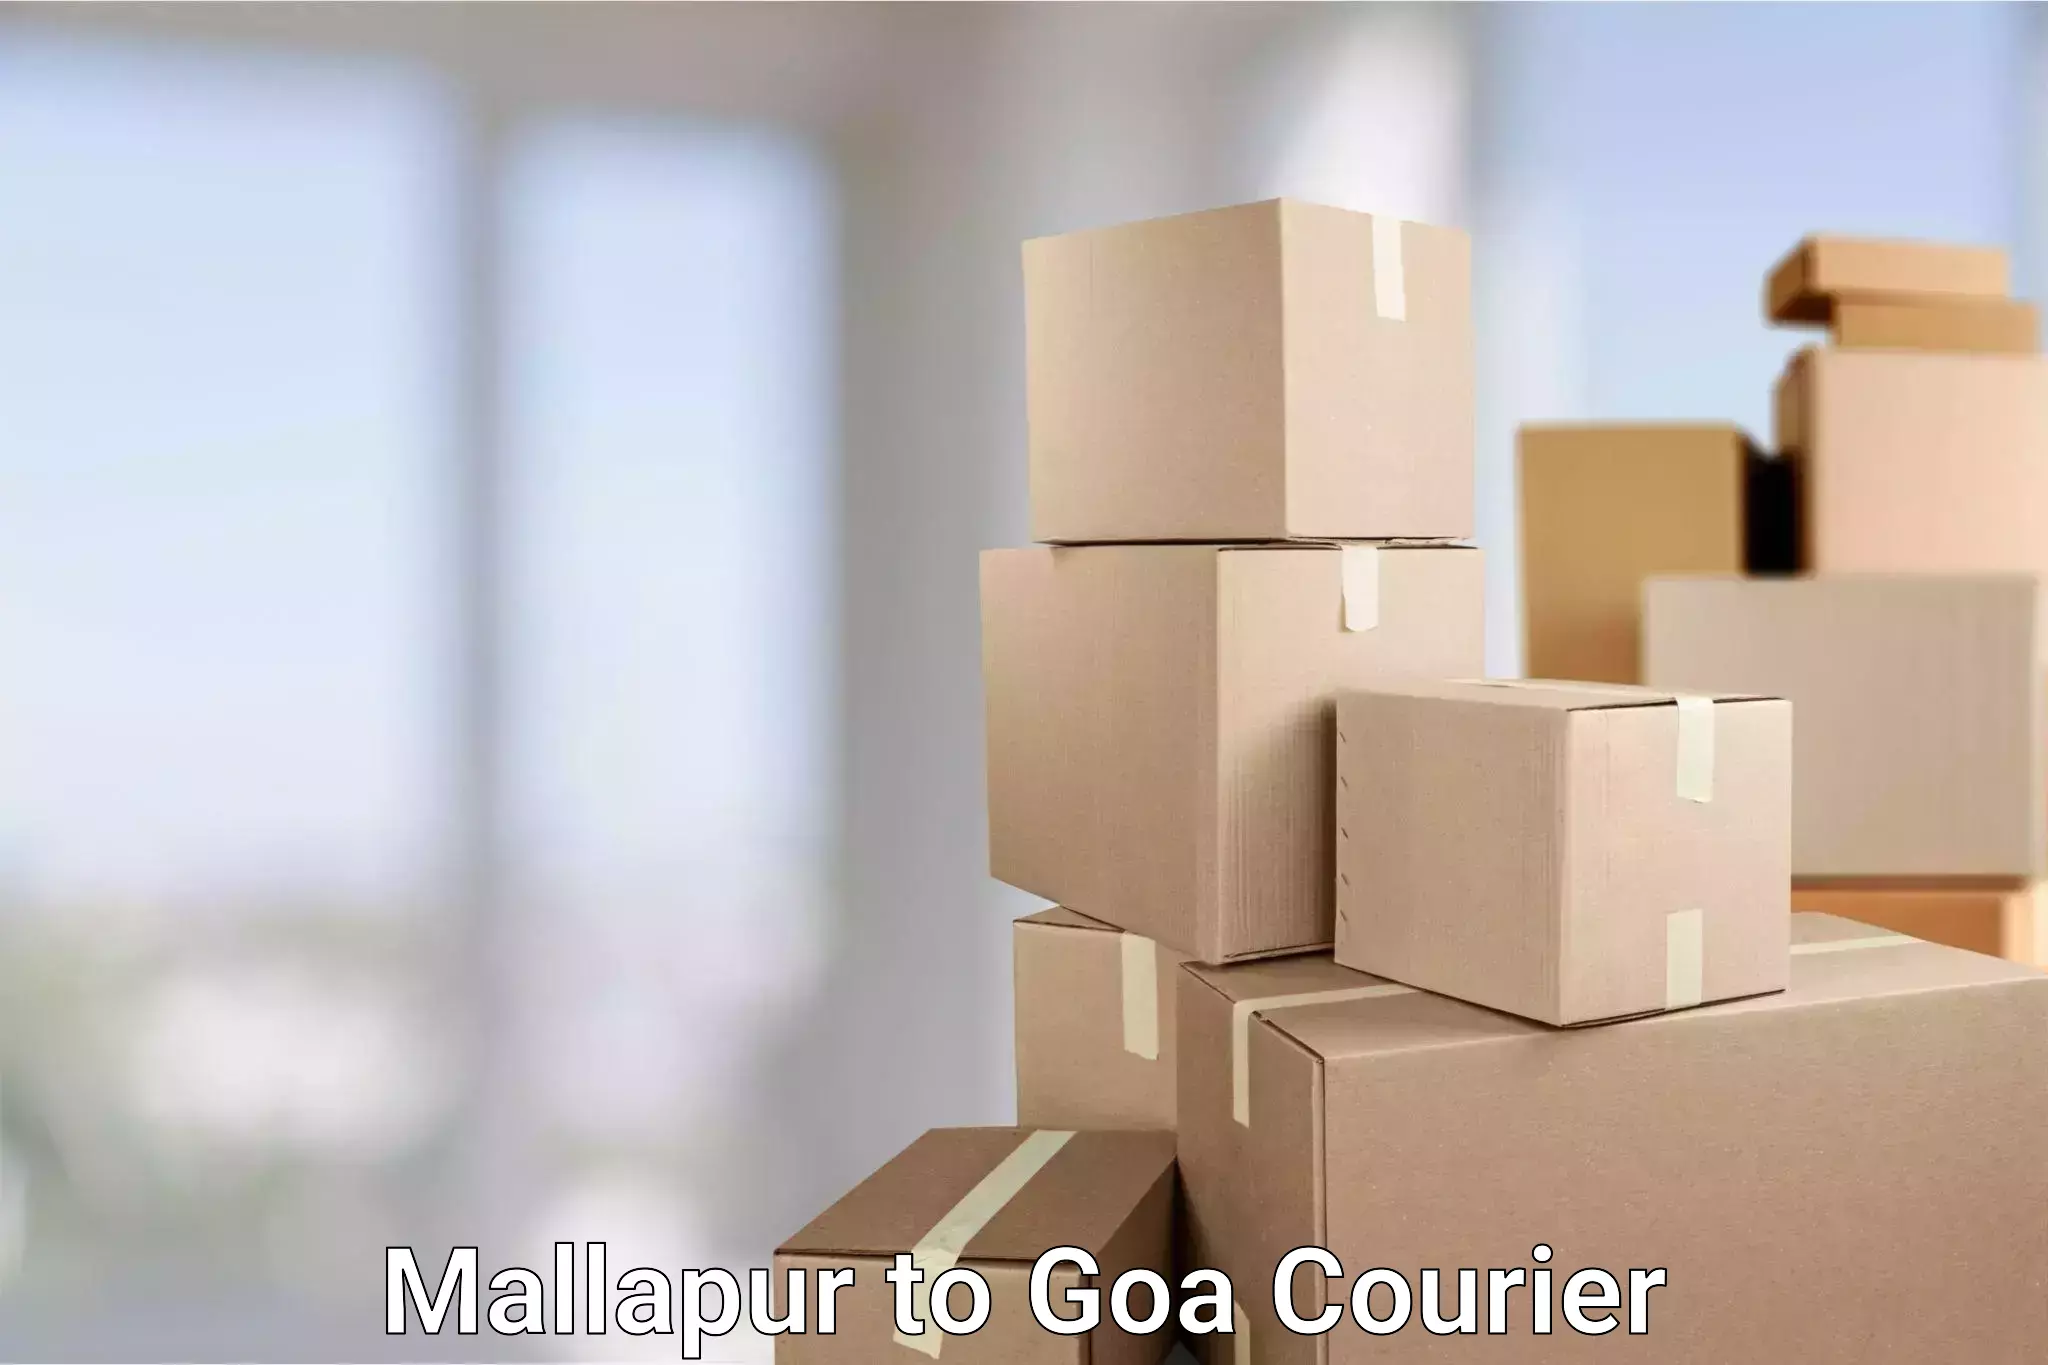 Residential courier service Mallapur to Panaji